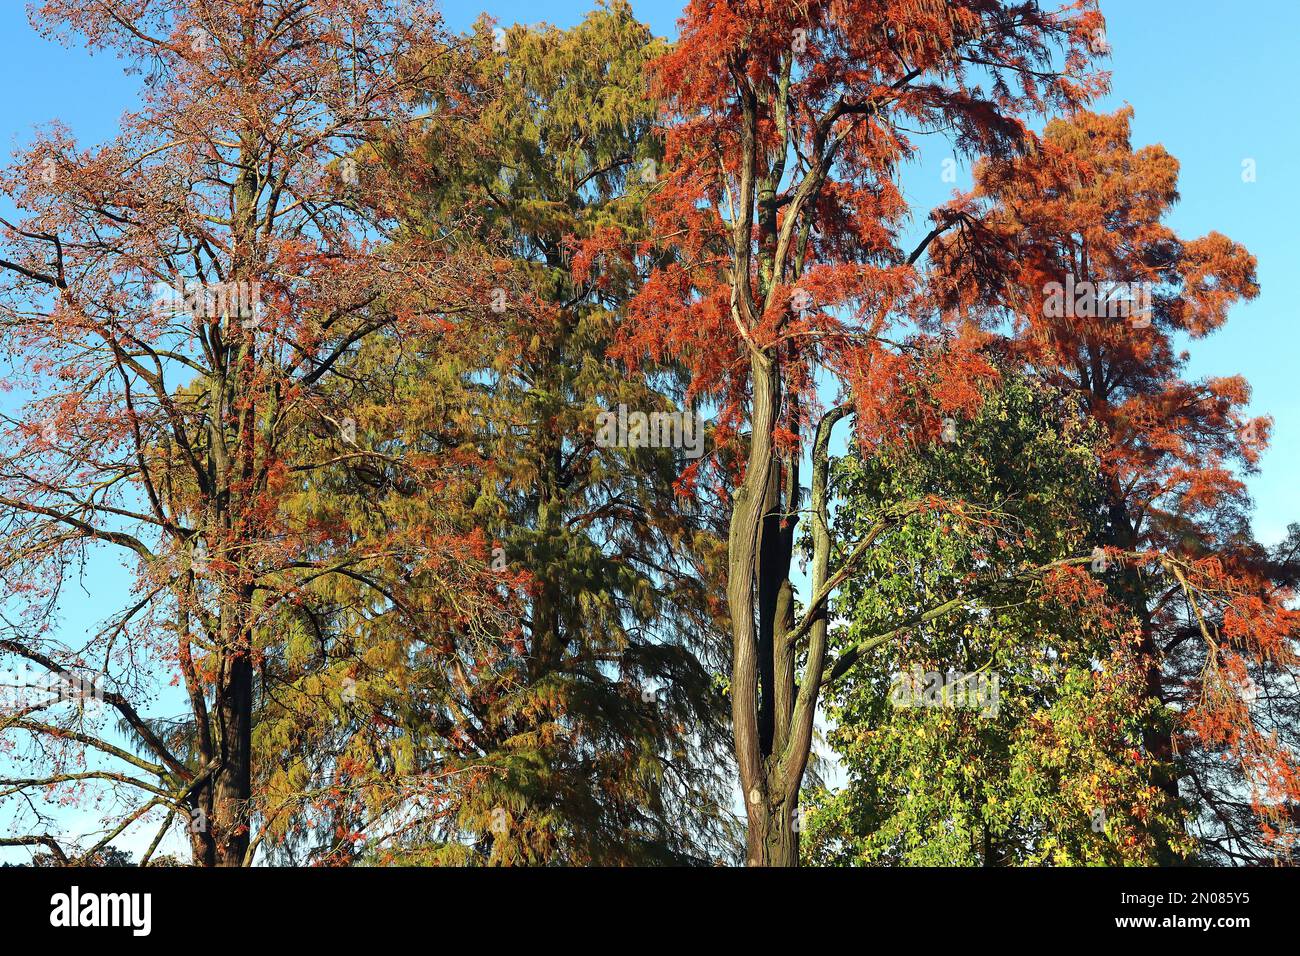 A Golden Larch tree (Pseudolarix amabilis) towers into a bright blue sky, seen in its autumn (fall) colour in November, southern England Stock Photo